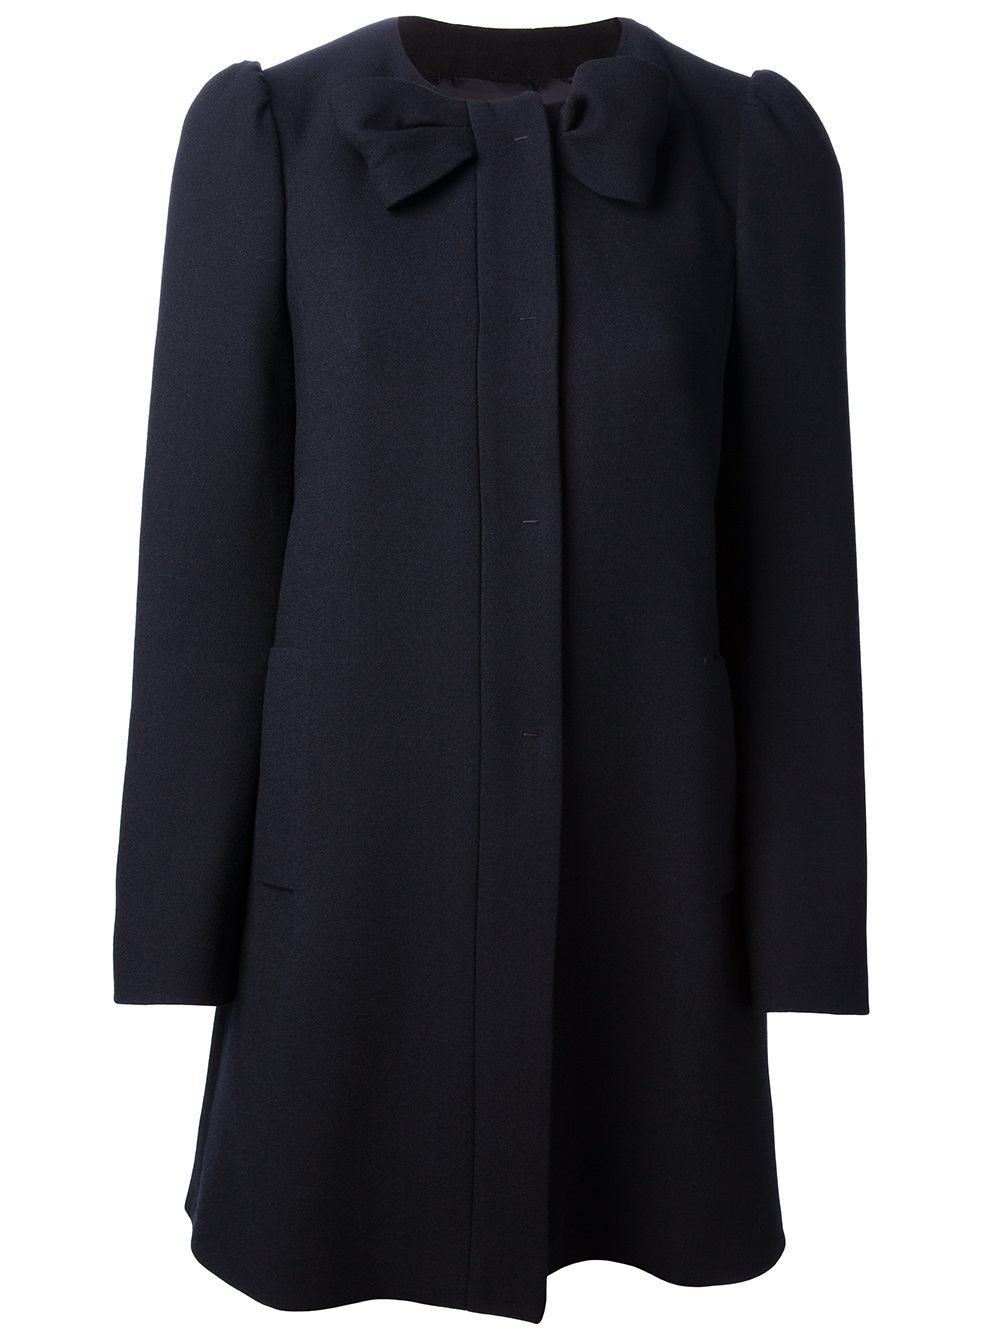 Lyst - Red Valentino Bow Coat in Black